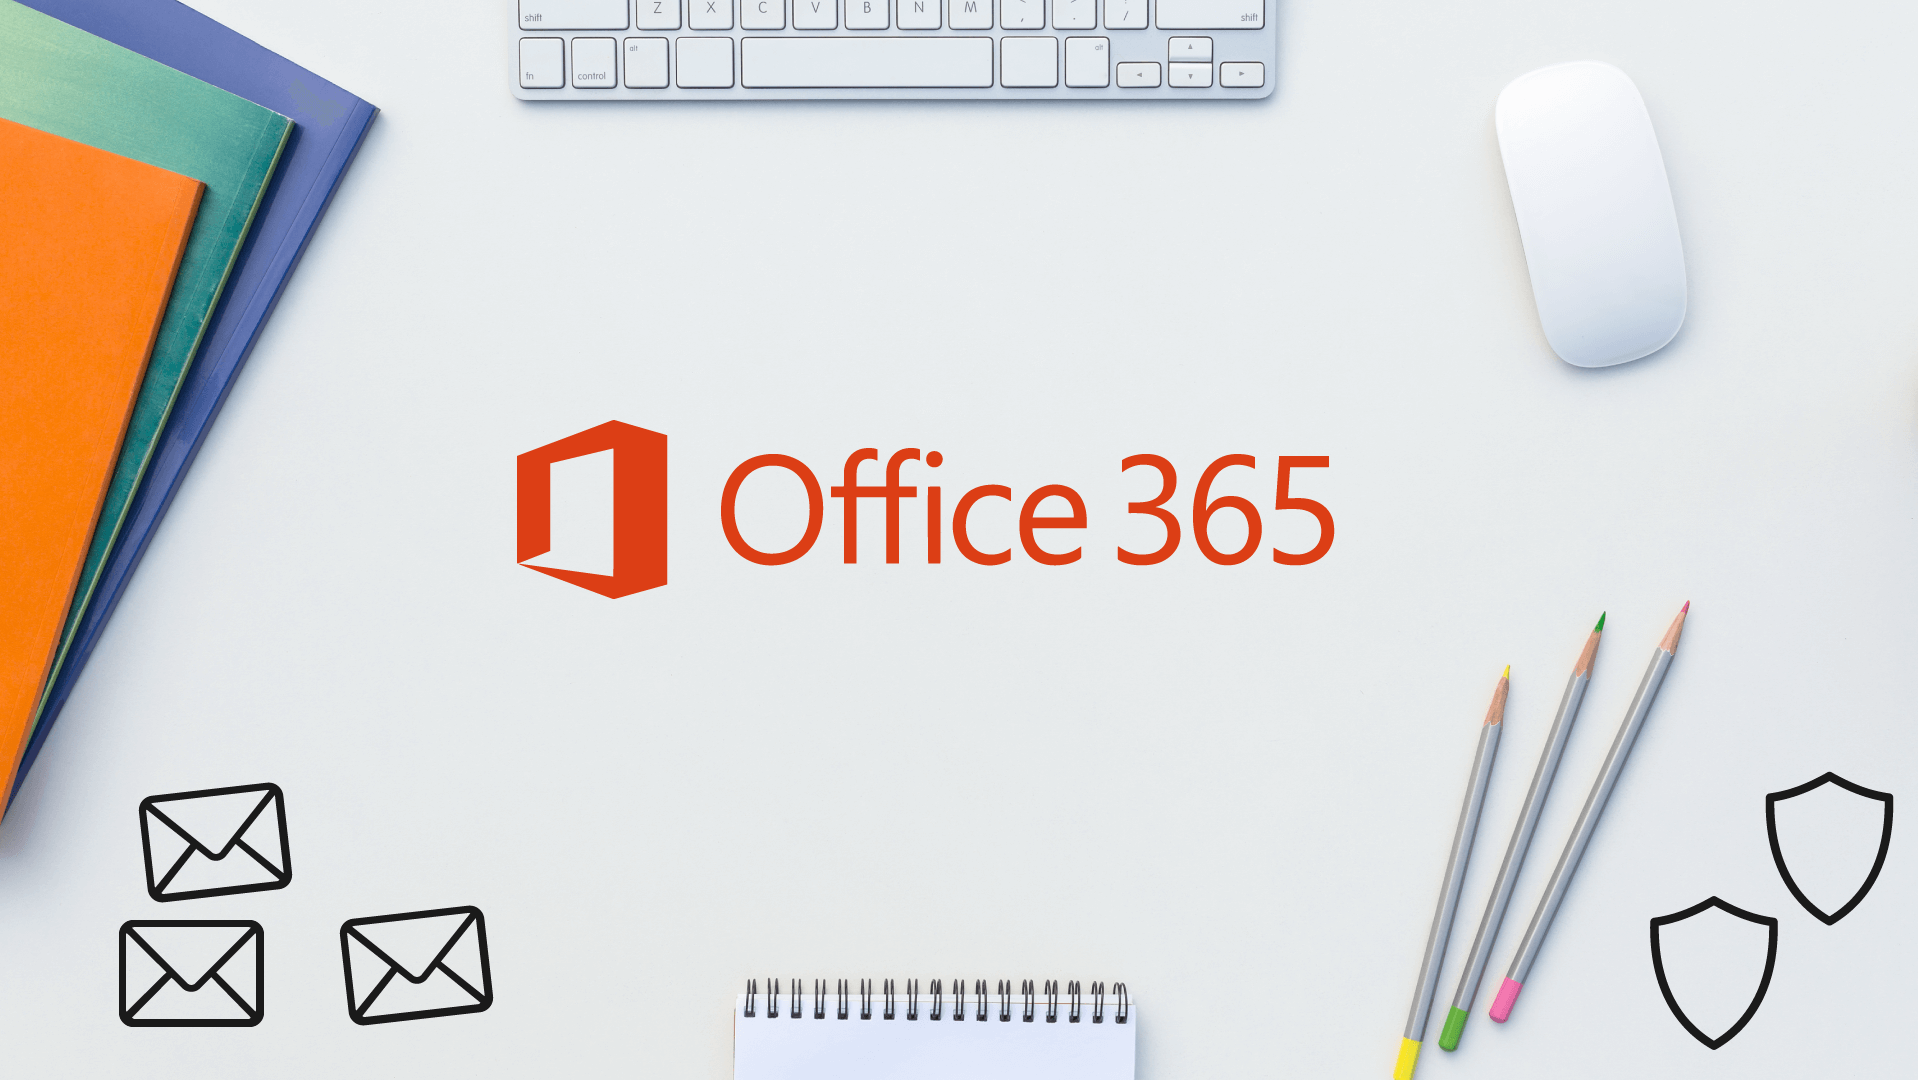 MS-040 – Manage SharePoint and OneDrive in Microsoft 365 (MS-040T00)